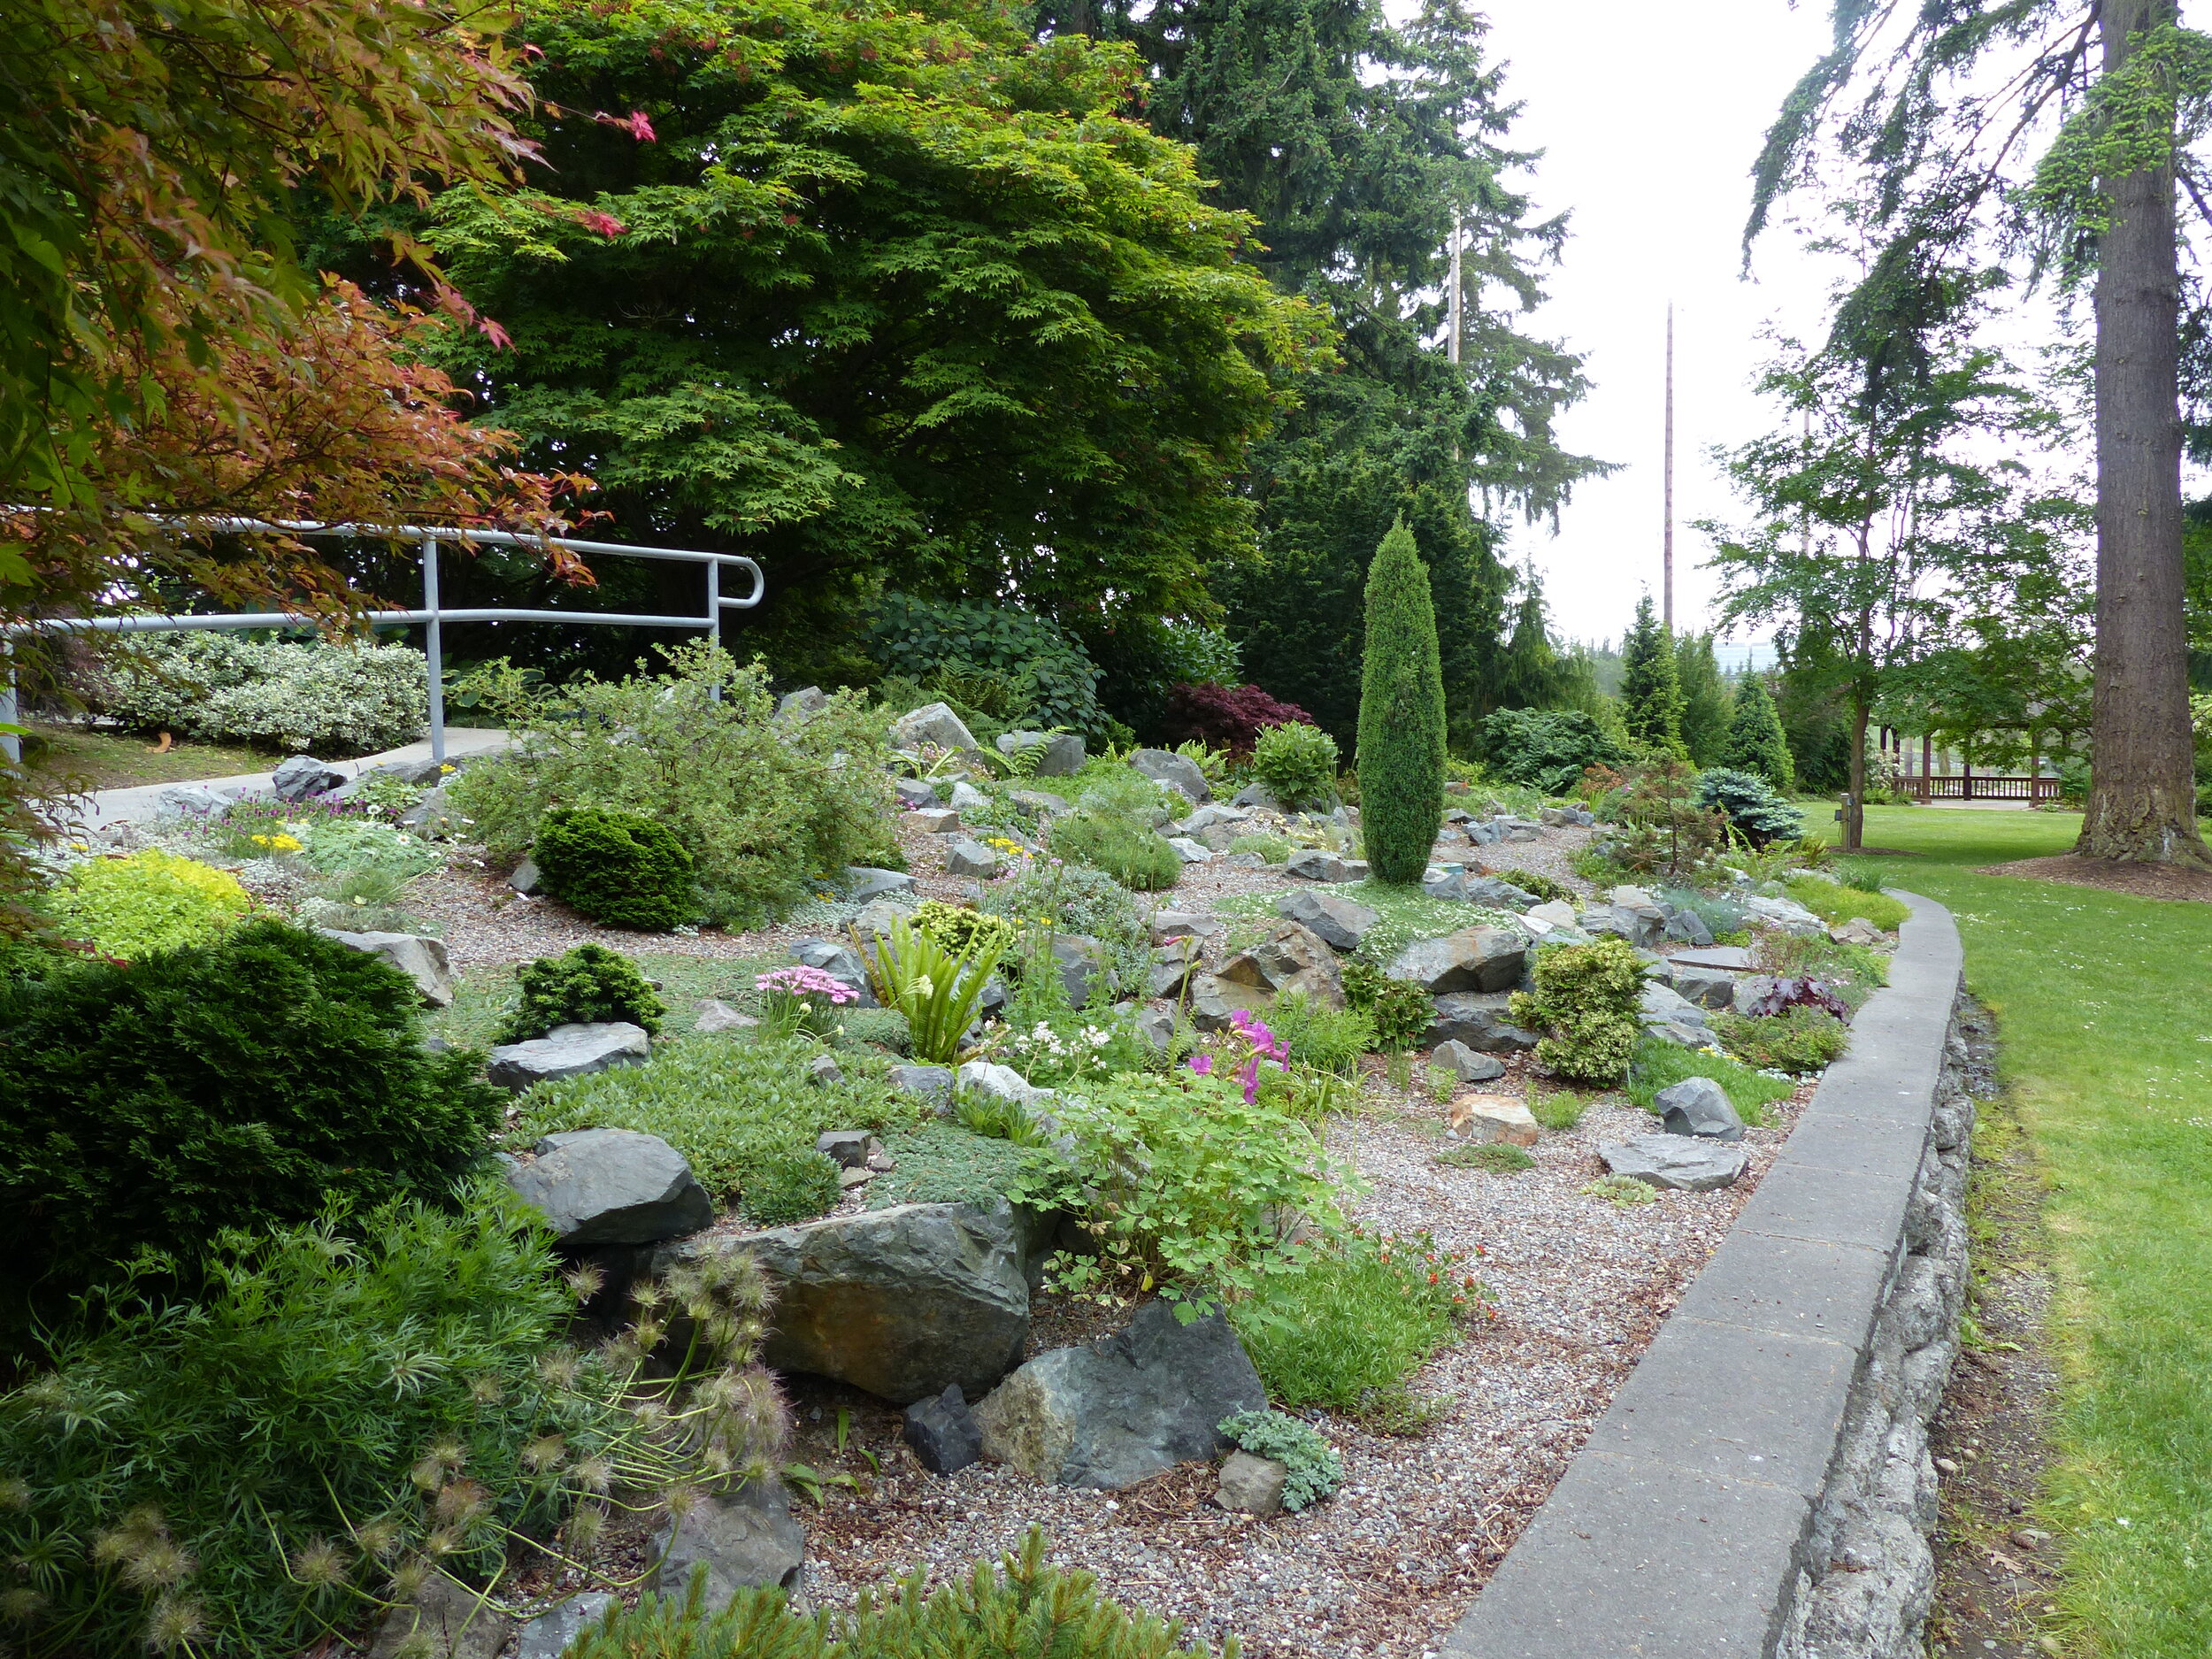  A 900 square foot rock garden featuring alpine perennials, bulbs, dwarf shrubs and dwarf conifers installed at the bottom on the Viewing Mound. 